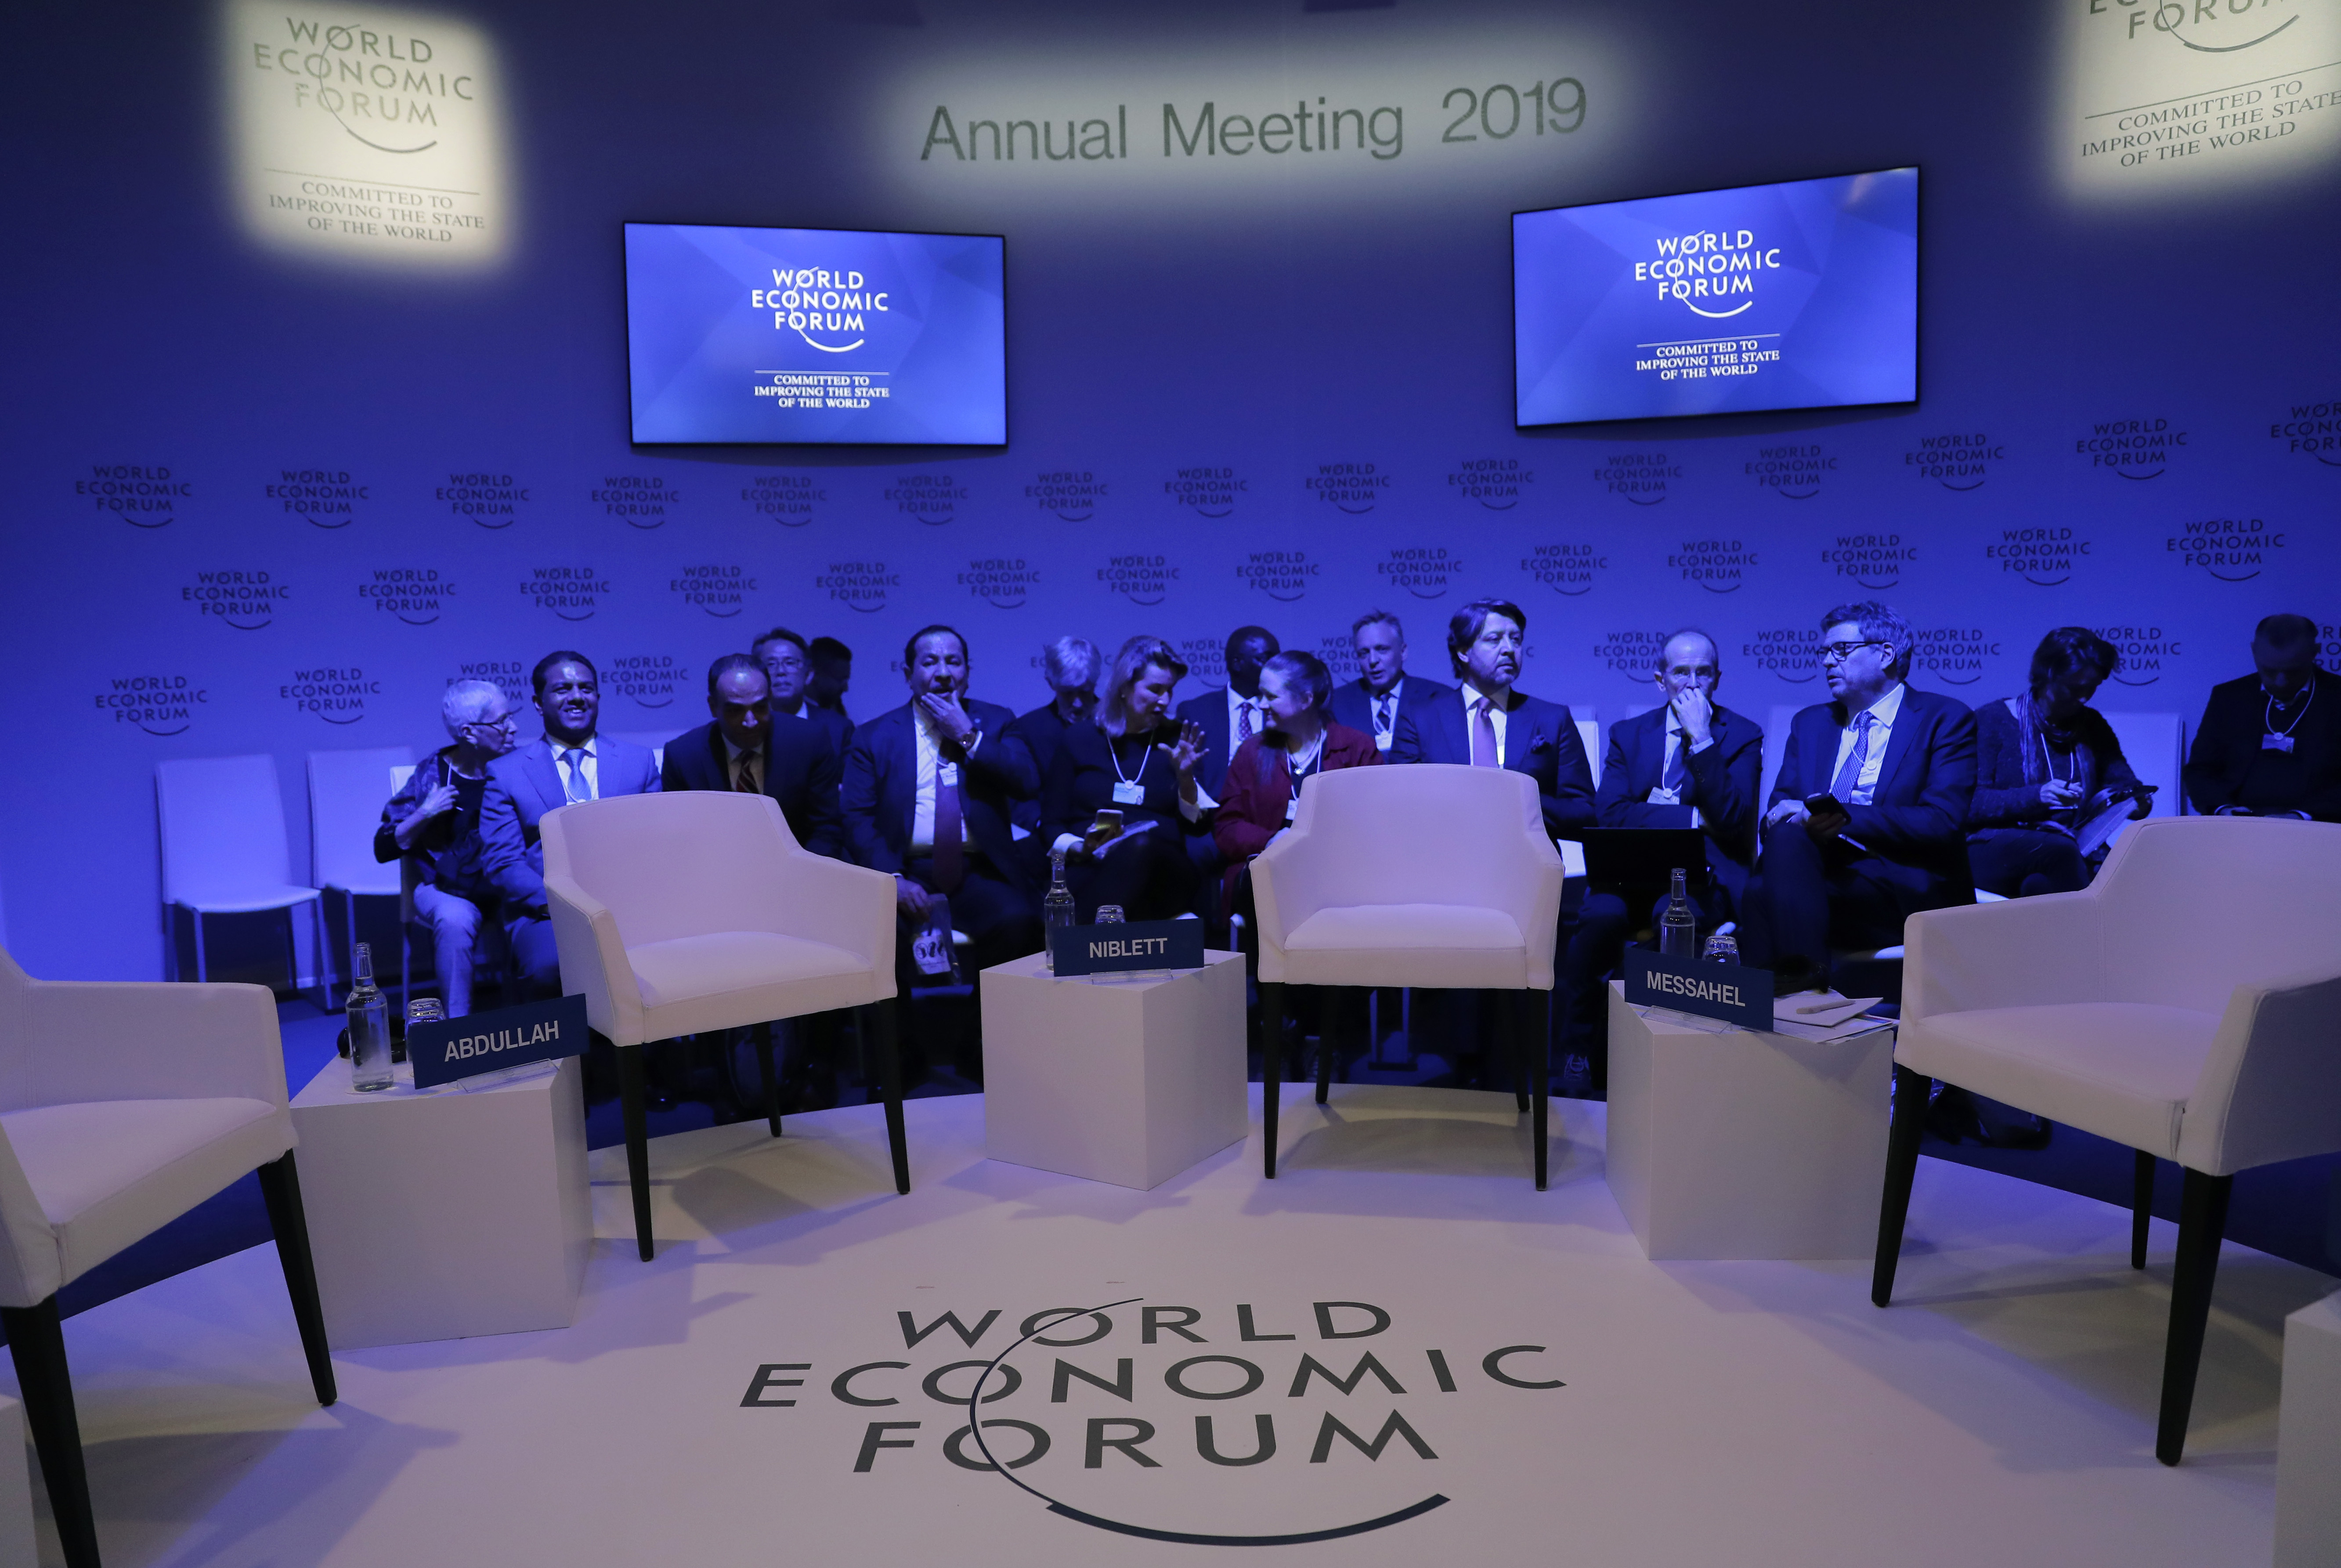 Attendees wait for the start of a session at the annual meeting of the World Economic Forum in Davos, Switzerland, Tuesday, Jan. 22, 2019. (AP Photo/Markus Schreiber)